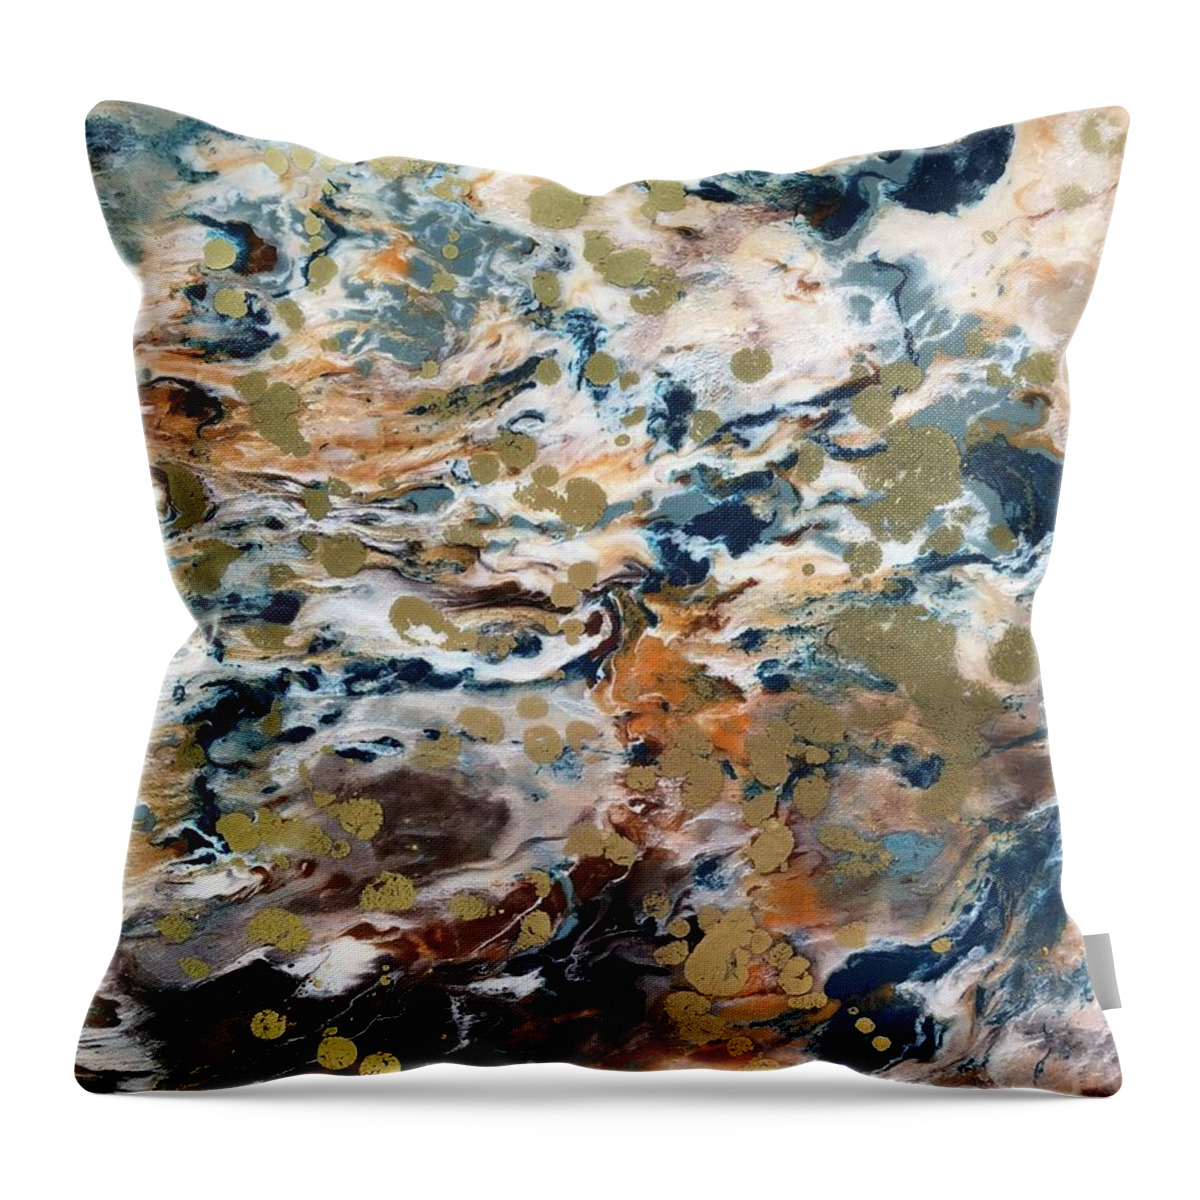 Abstract Throw Pillow featuring the painting Flotsam by Leslie Dobbins